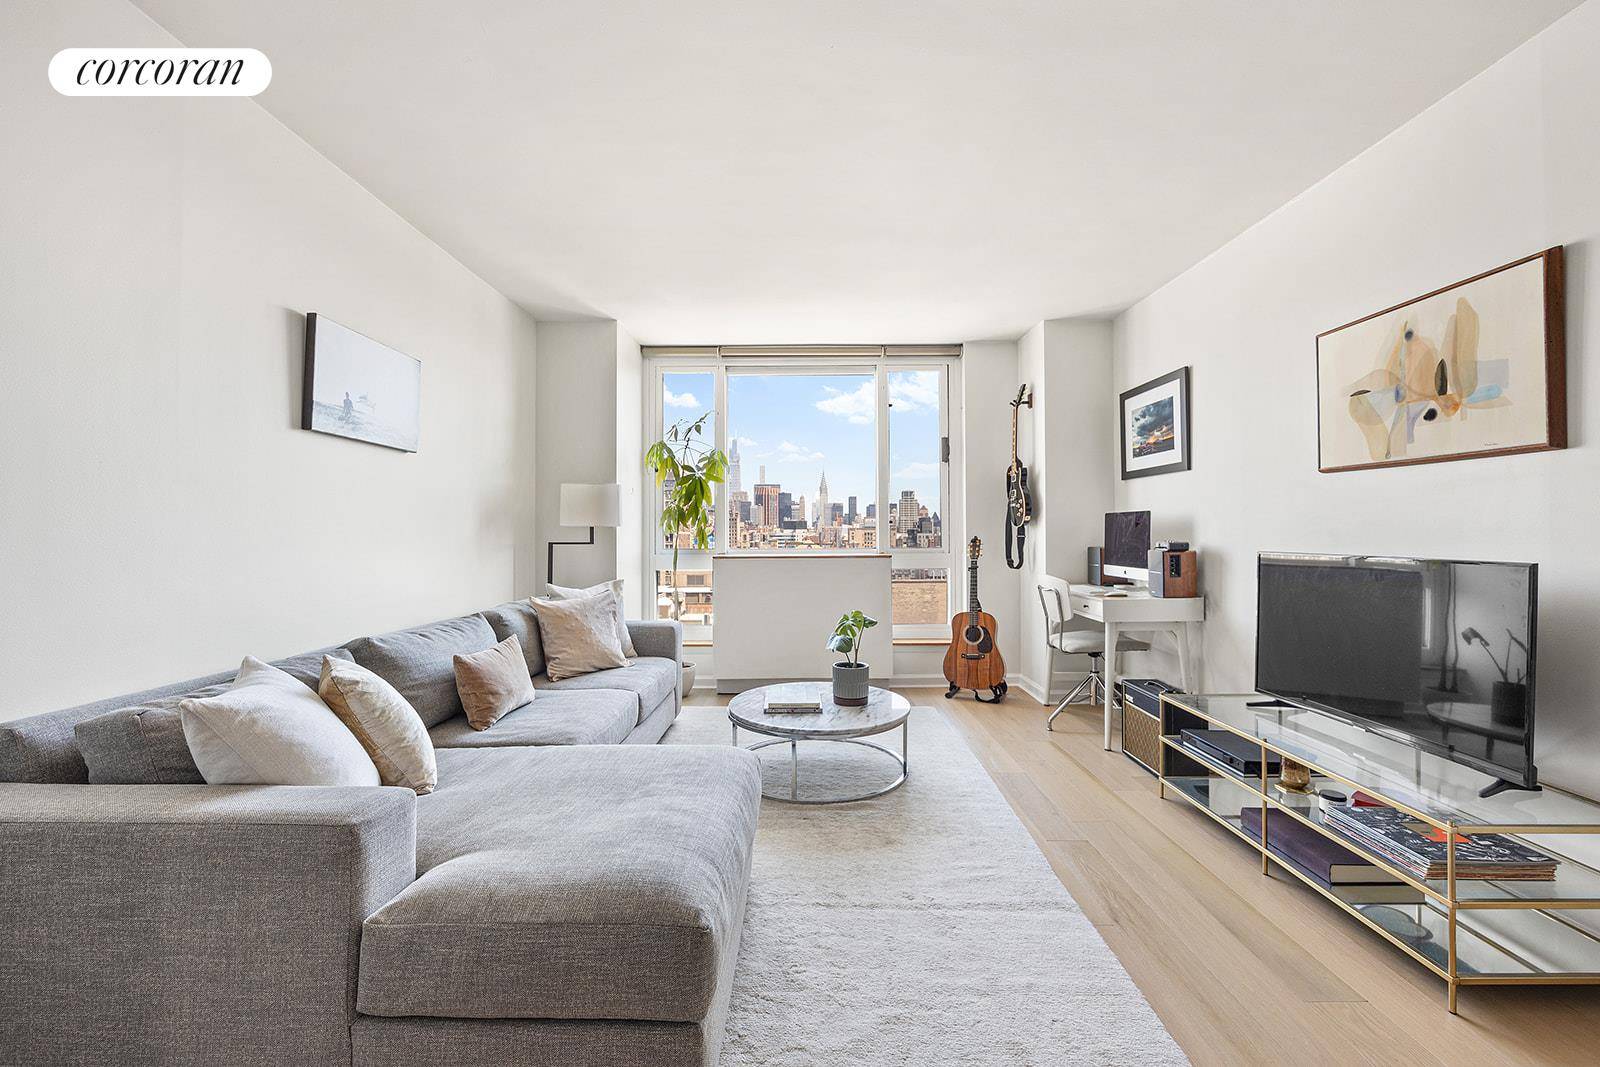 Welcome to 1 Irving Pl G20C Your One Bedroom condo in the heart of the city at the confluent of Gramercy Park and Union Square, with quintessential New York City ...